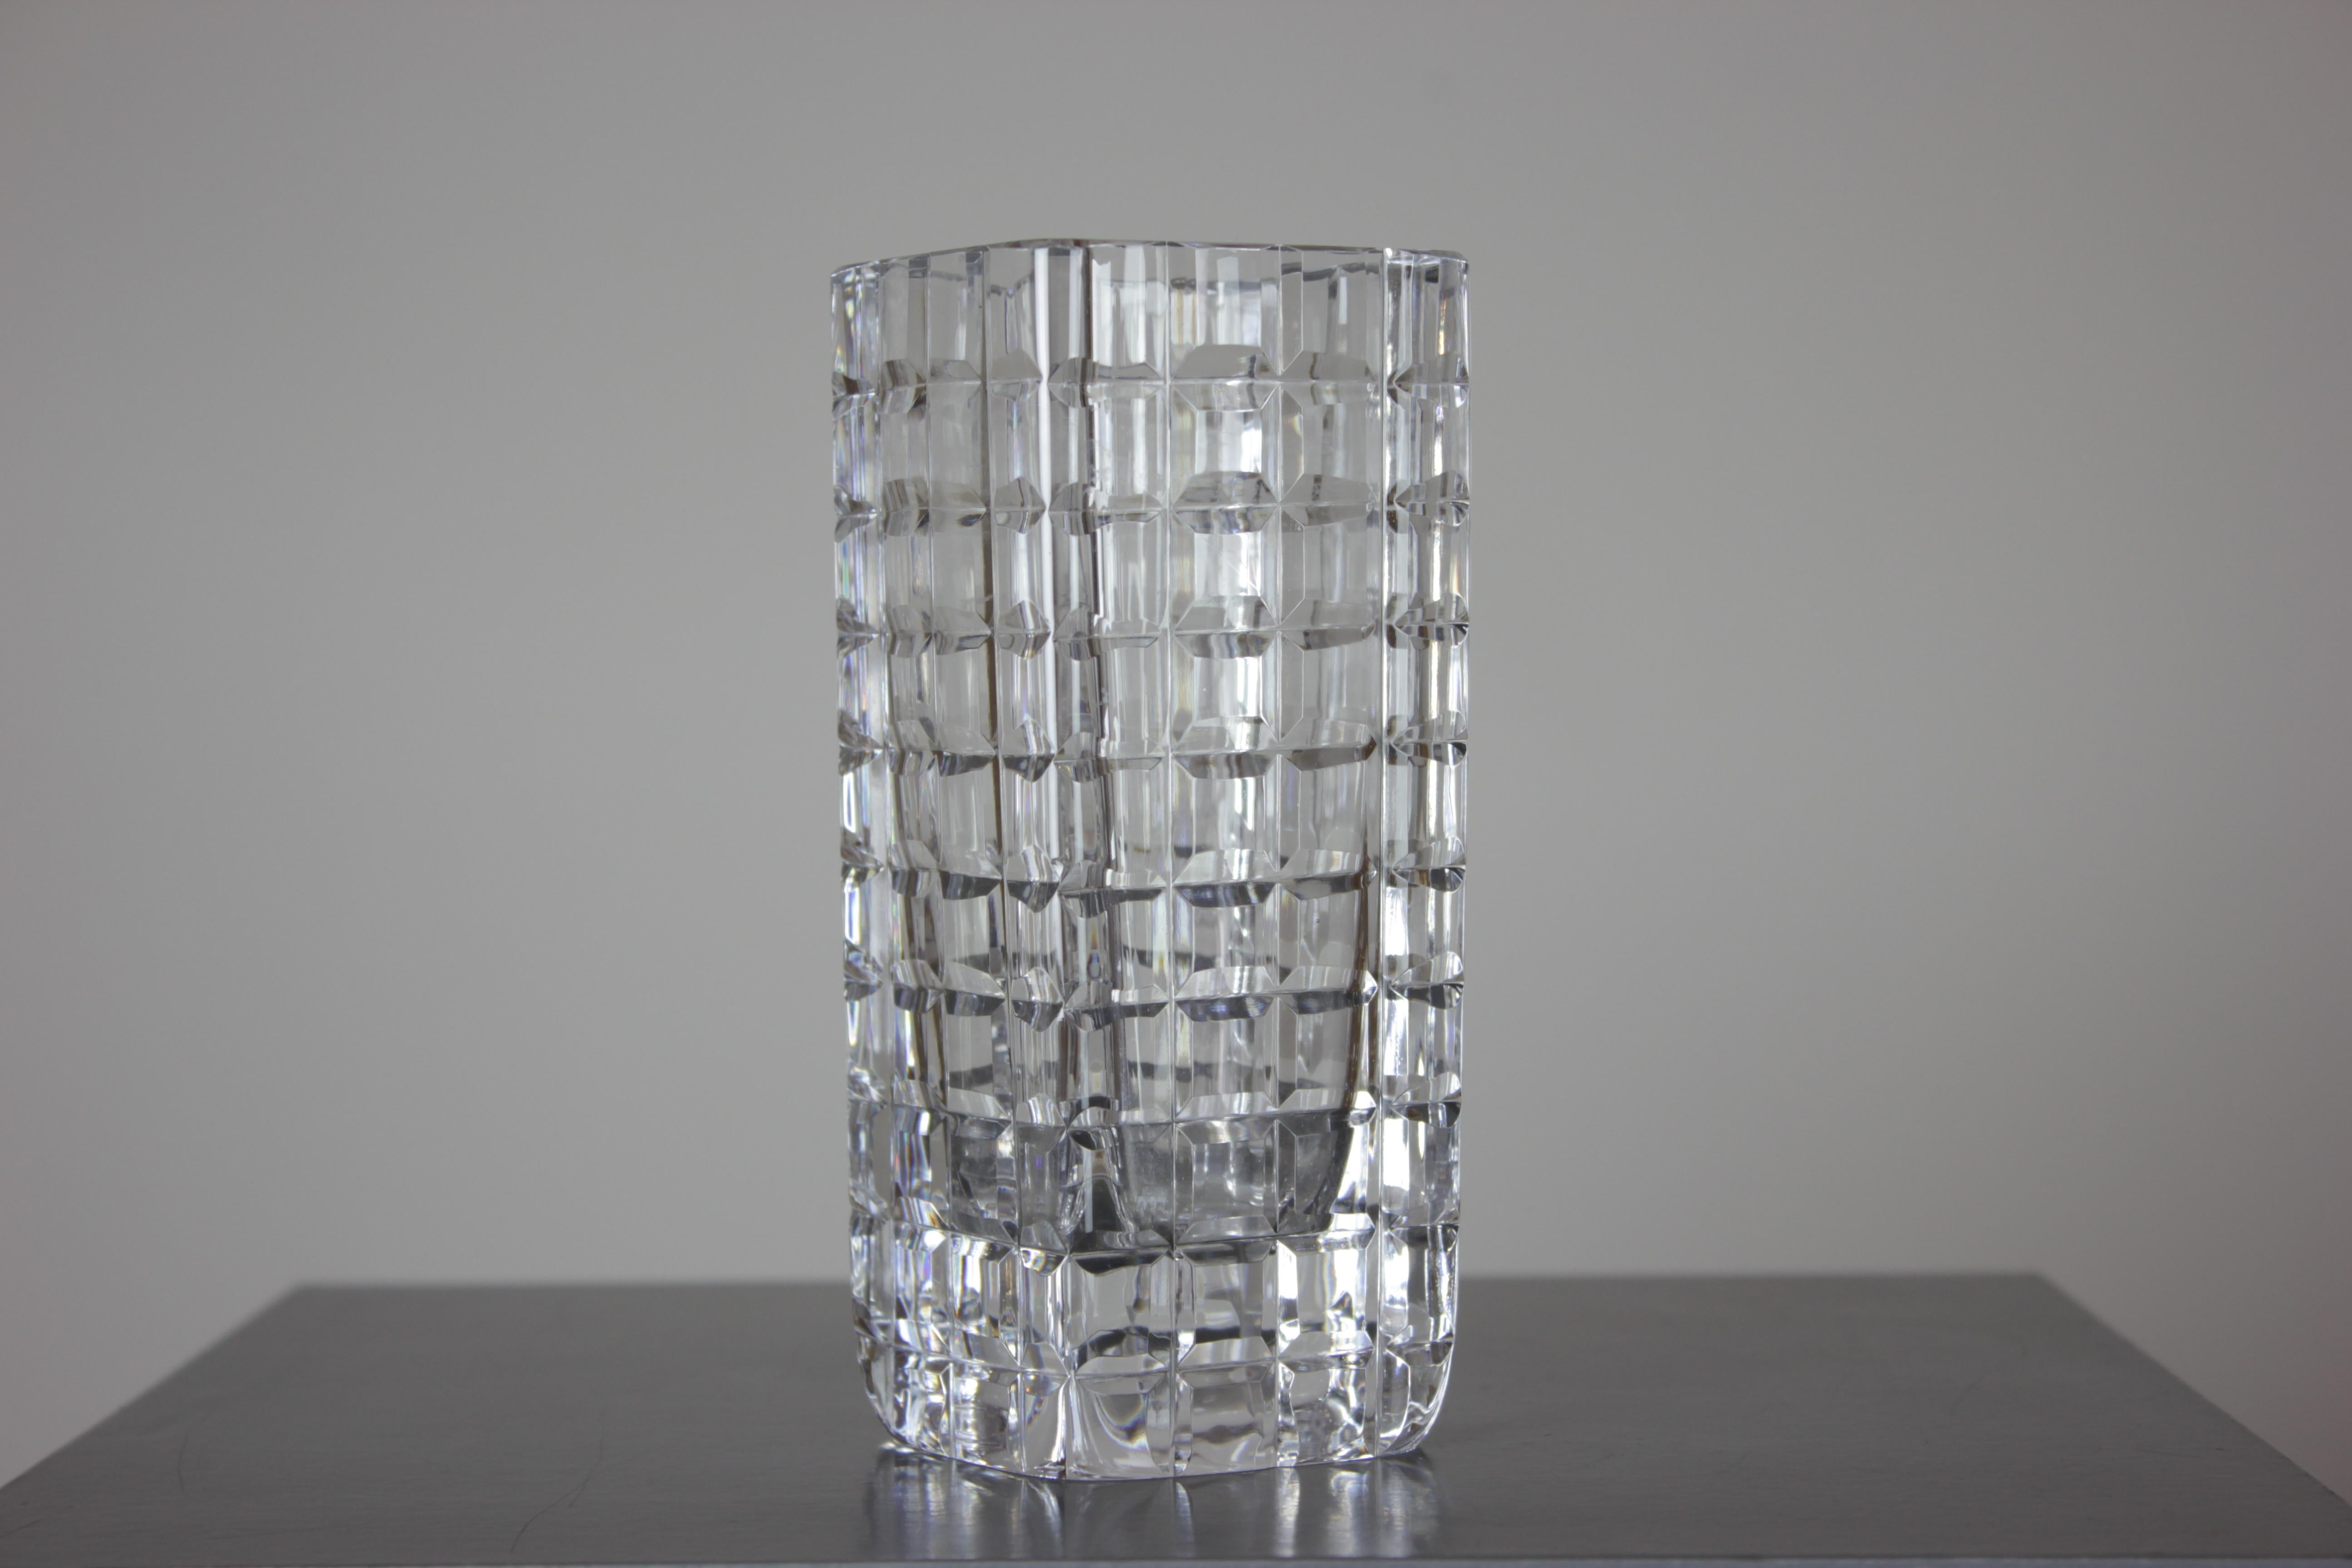 Add a touch of vintage sophistication to your home decor with this exquisite Mid-Century Glass Vase designed by Göran Wärff for Kosta. Crafted with meticulous attention to detail, this authentic glass vase exudes timeless elegance and exceptional